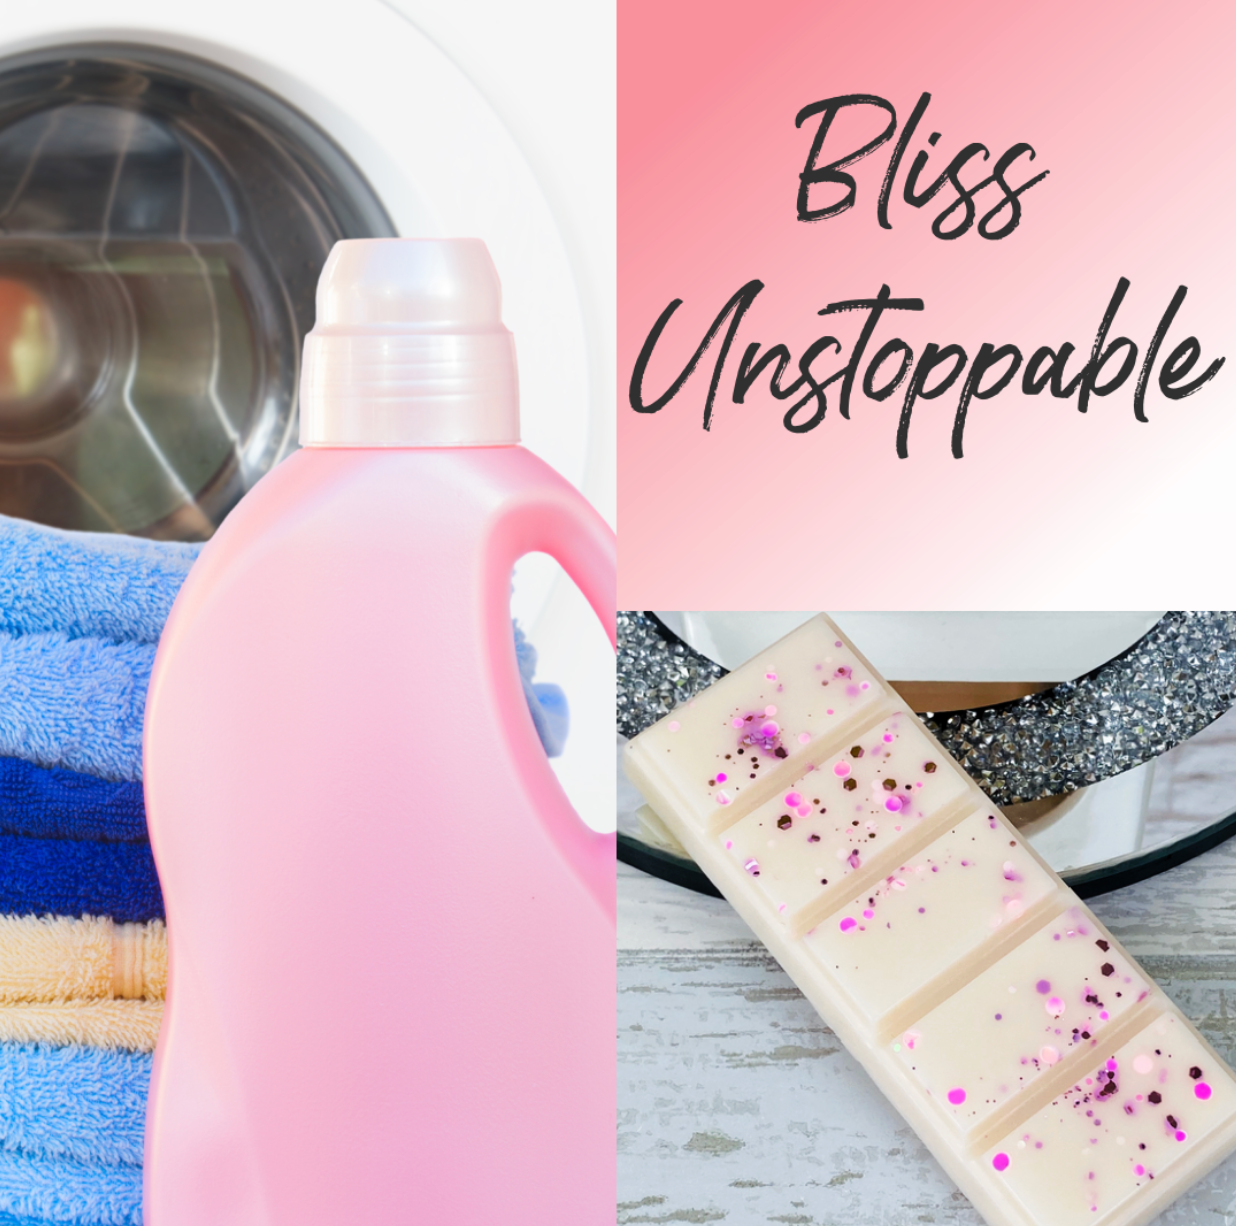 Bliss Unstoppable Laundry Scented Wax Melt Snap Bar, Bliss Unstoppable  Laundry Scented Wax, Soy Wax Melts, Wax Snap Bar, Washing Scented Wax Melts,  Fresh Scent Wax Melts – DollyBird Design Co.